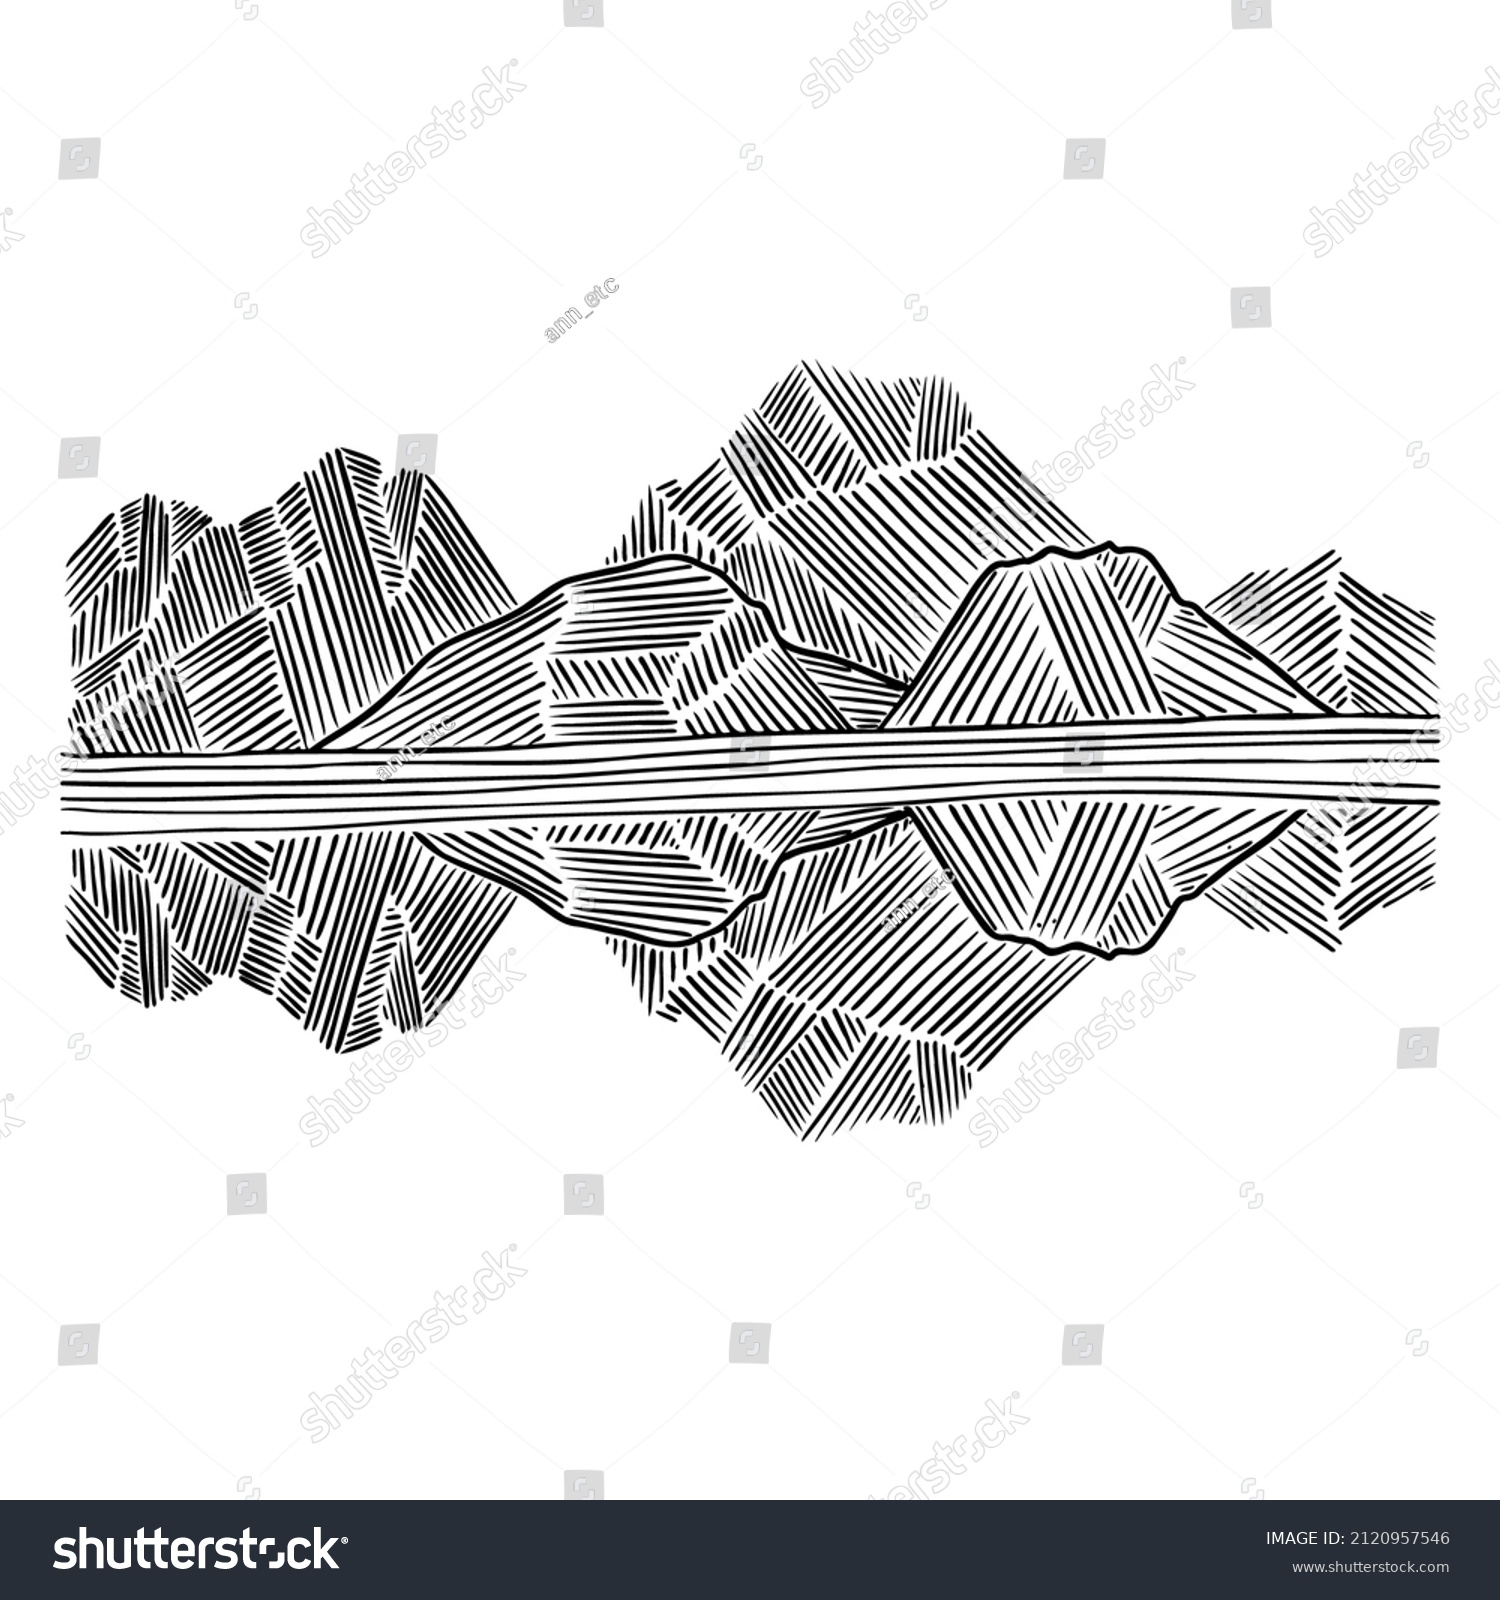 SVG of Abstract graphic mountains, stars, moon with lake reflection. Hand drawnlake Tahoe in California. Vector illustration. Perfect for badges, emblems, patches, t-shirts, etc. svg